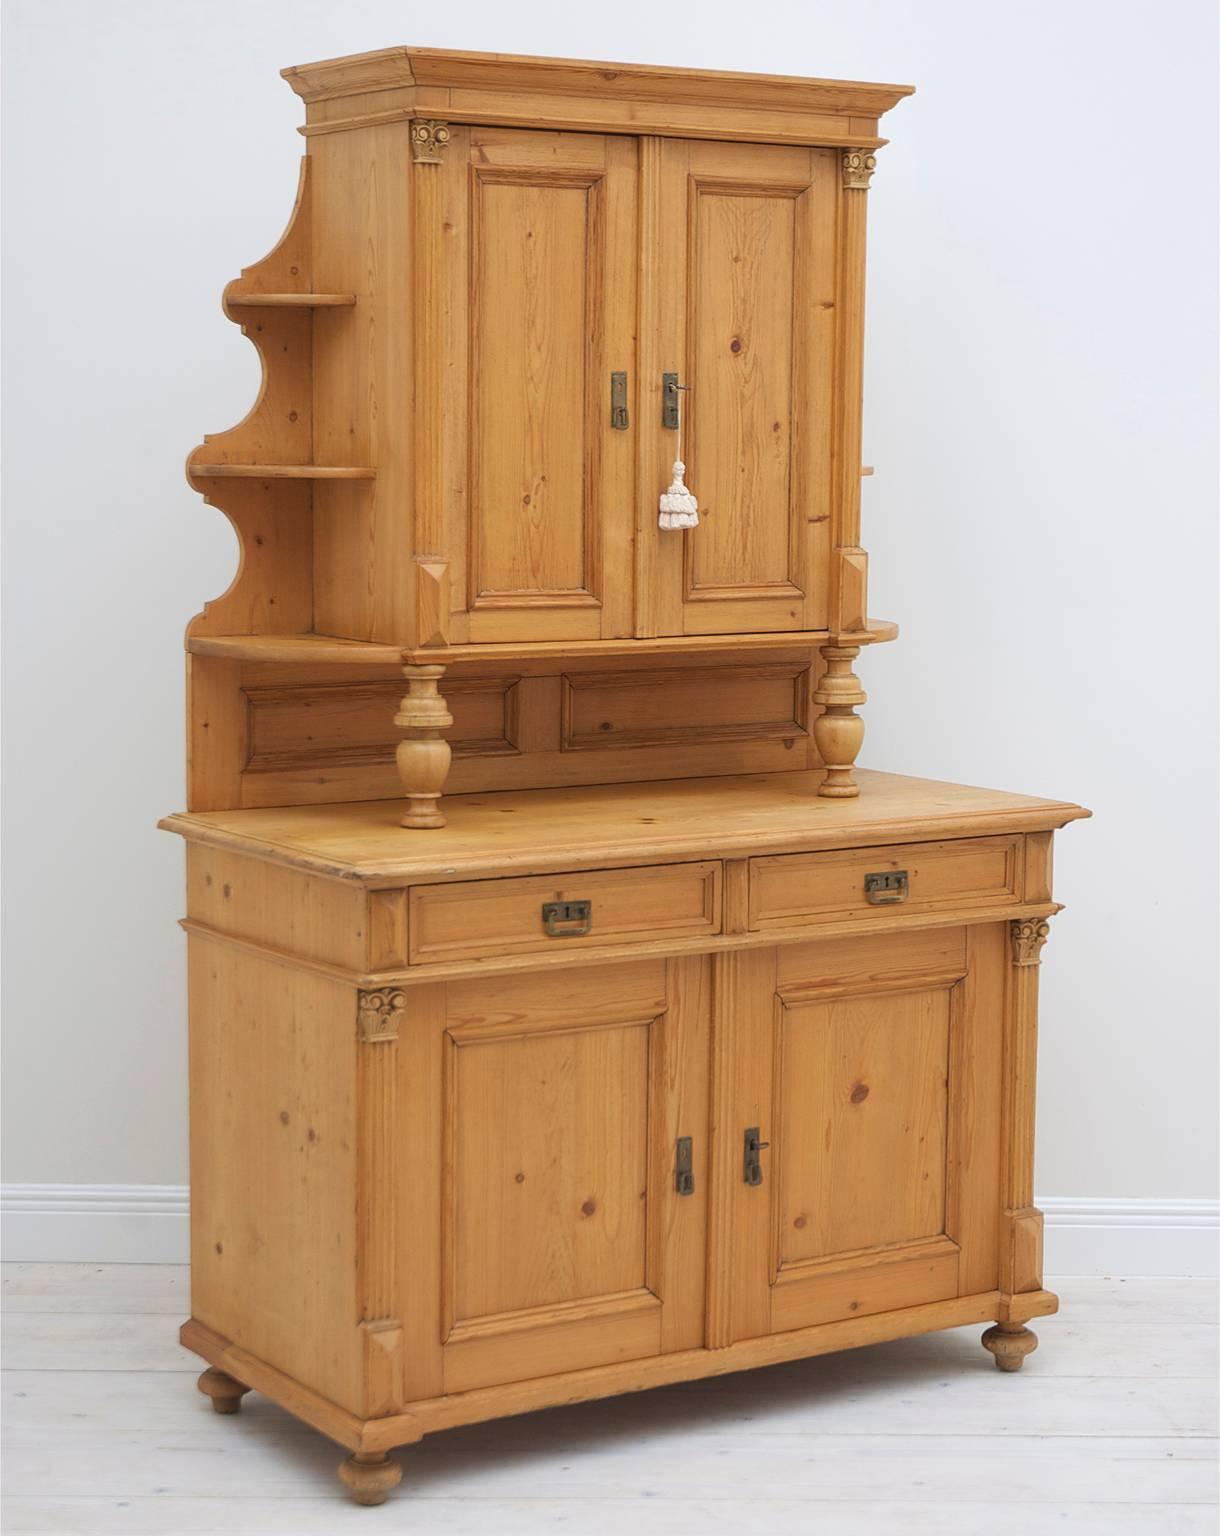 A charming cupboard in pine from the rise of the German Republic, circa 1880-1890. Upper cabinet is separated from the lower cabinet by a paneled back splash and turned front pillars. Both sets of doors are flanked by fluted pilasters topped with